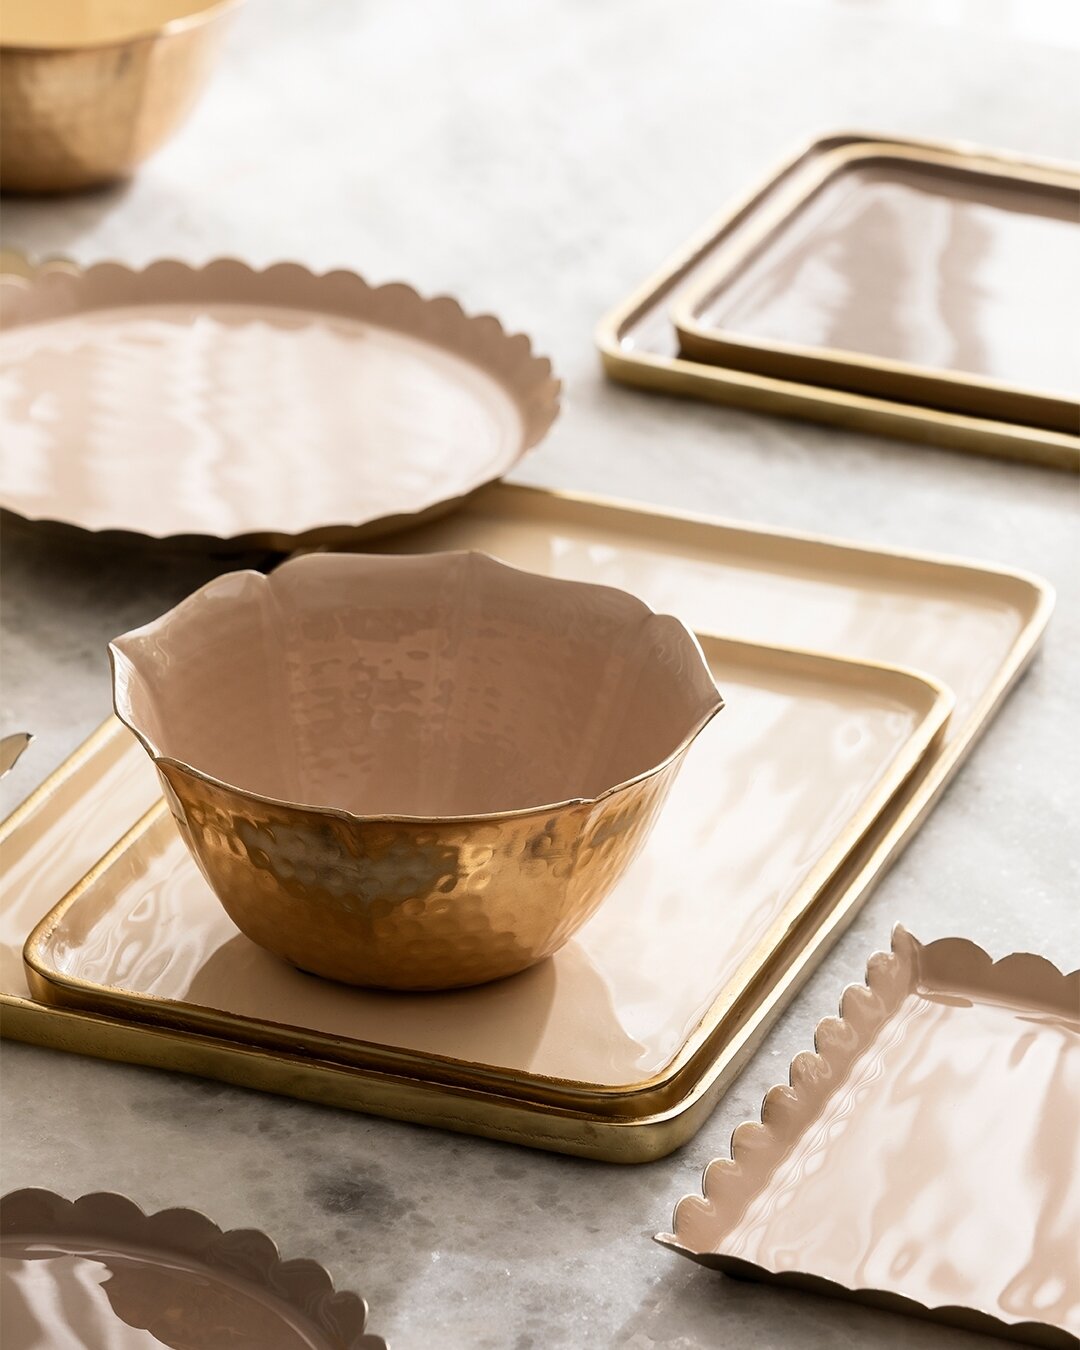 Have you explored the Bazaar Collection? 🤩 There is so much choice across decorative bowls, platters and trays in gorgeous tones and shapes.​​​​​​​​⁣

Link in bio ✧